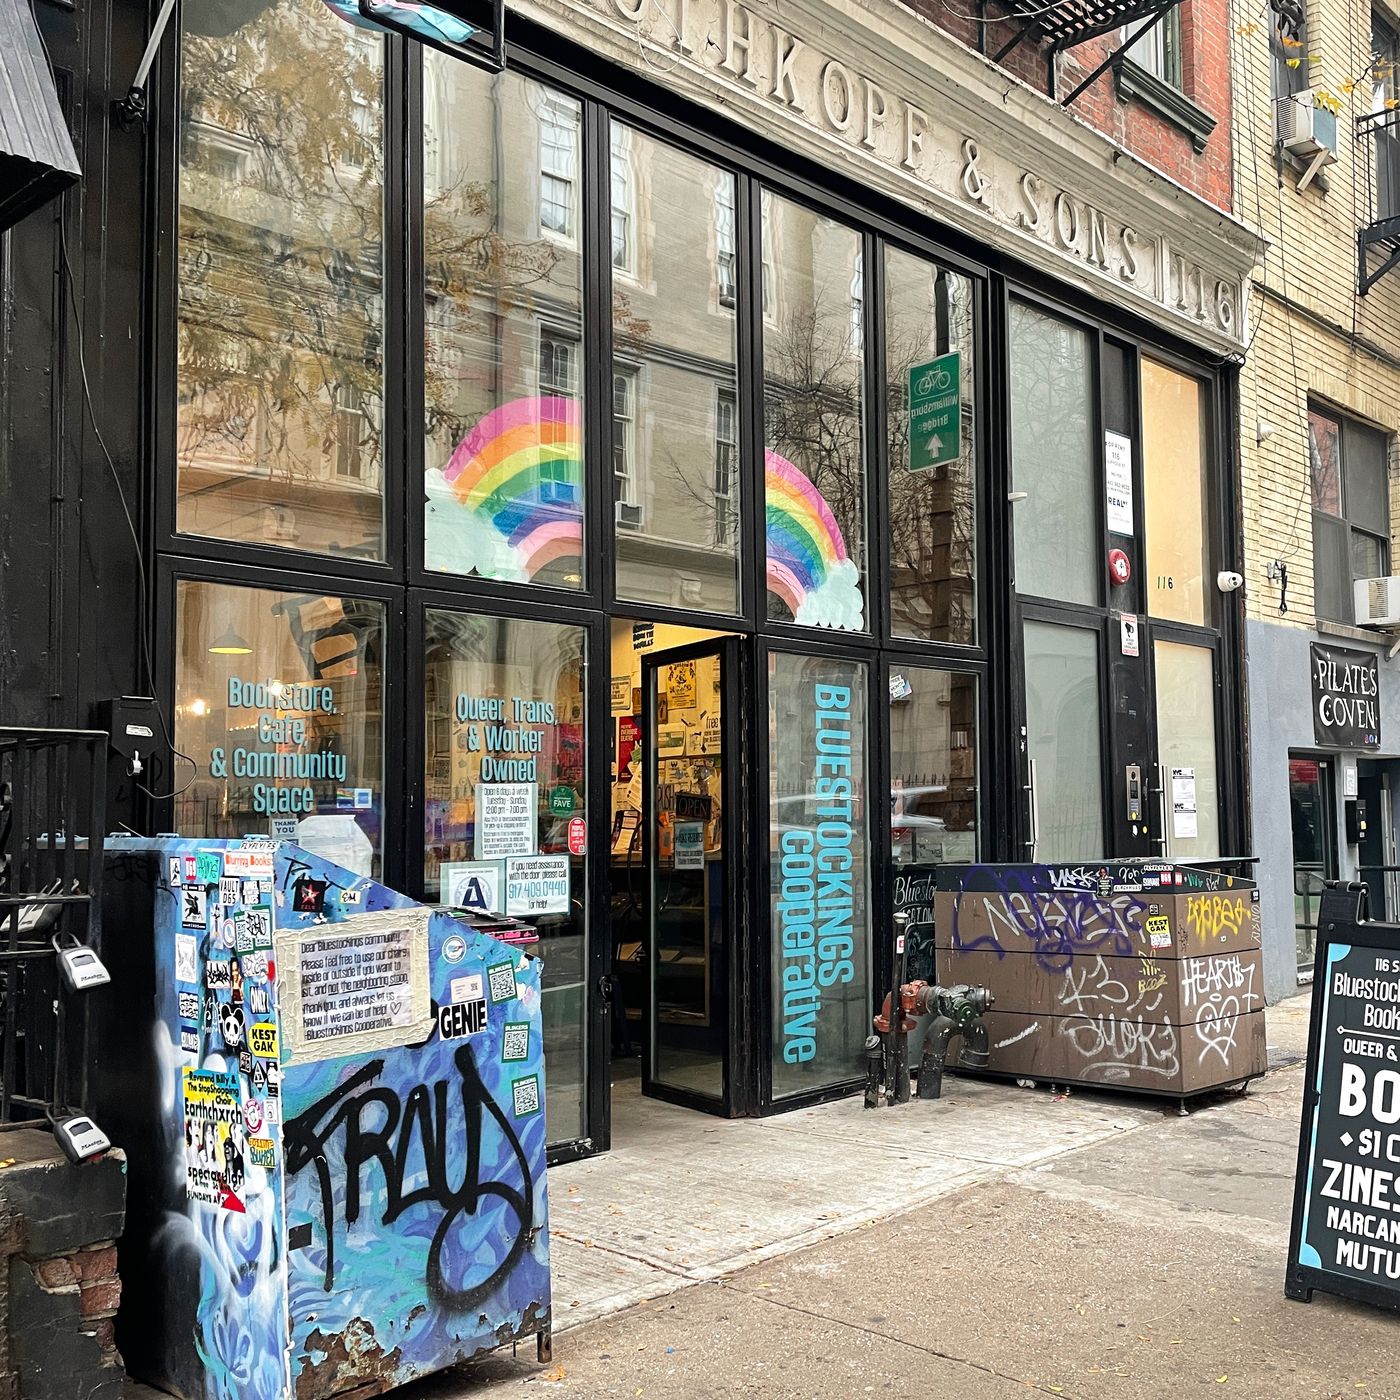 Bluestockings Is Facing Eviction for Handing Out Narcan